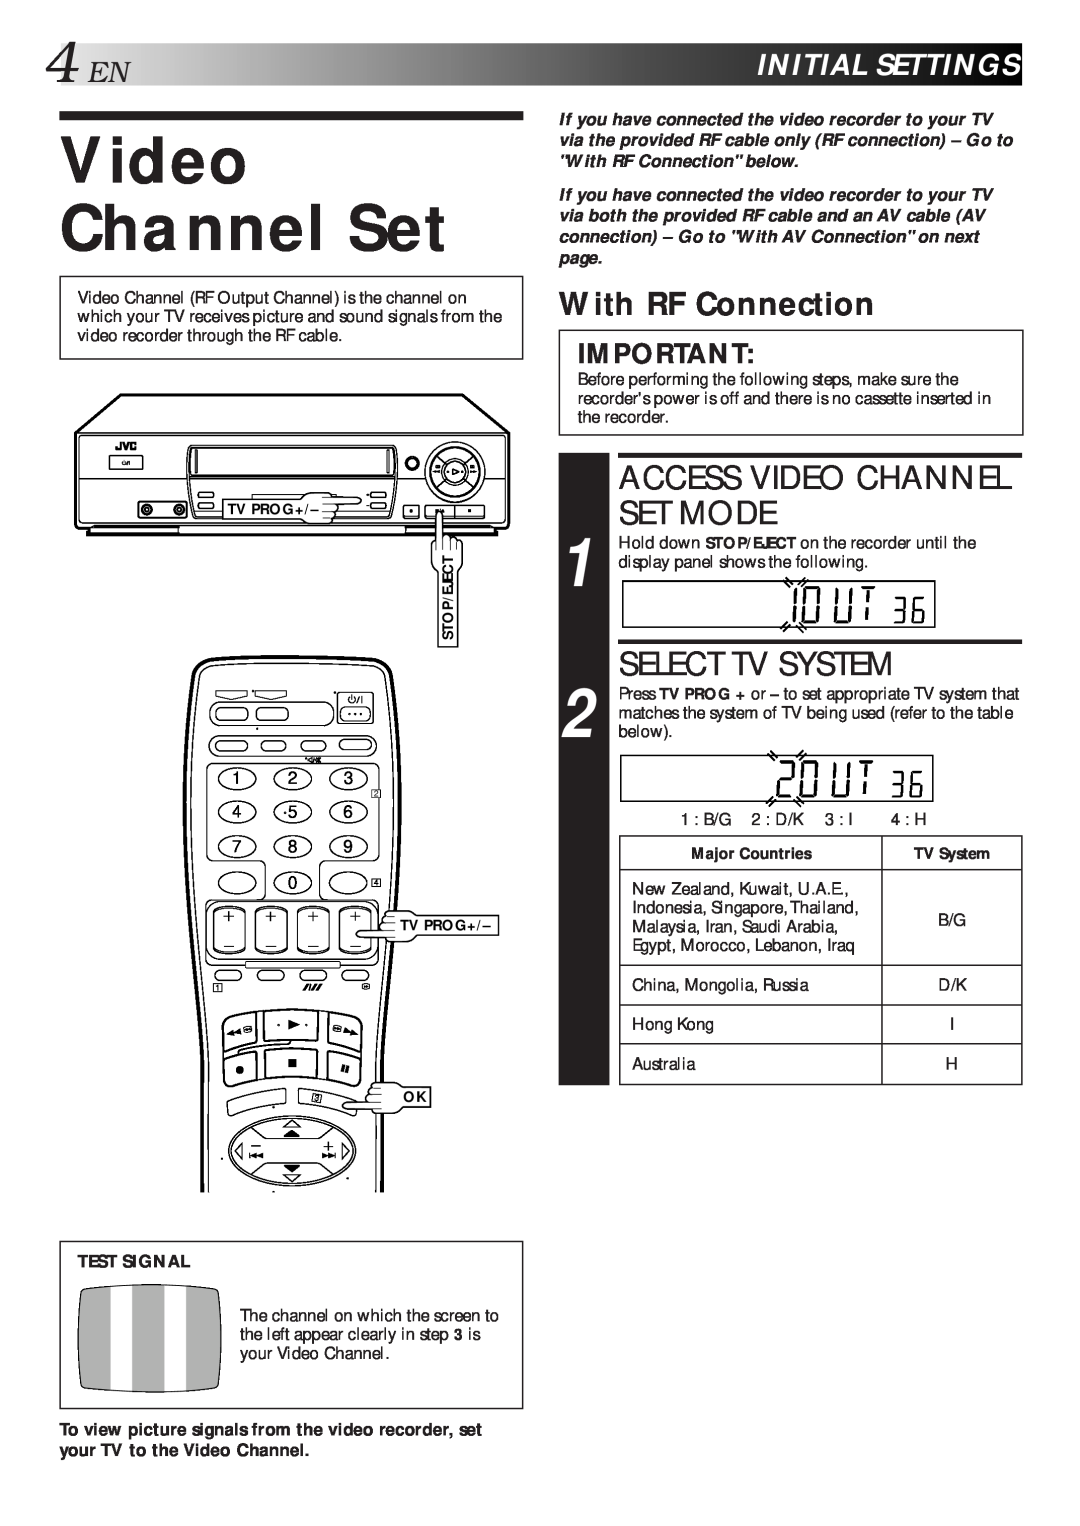 JVC HR-J461MS specifications Access Video Channel Set Mode, Select Tv System, 4ENINITIALSETTINGS, With RF Connection 